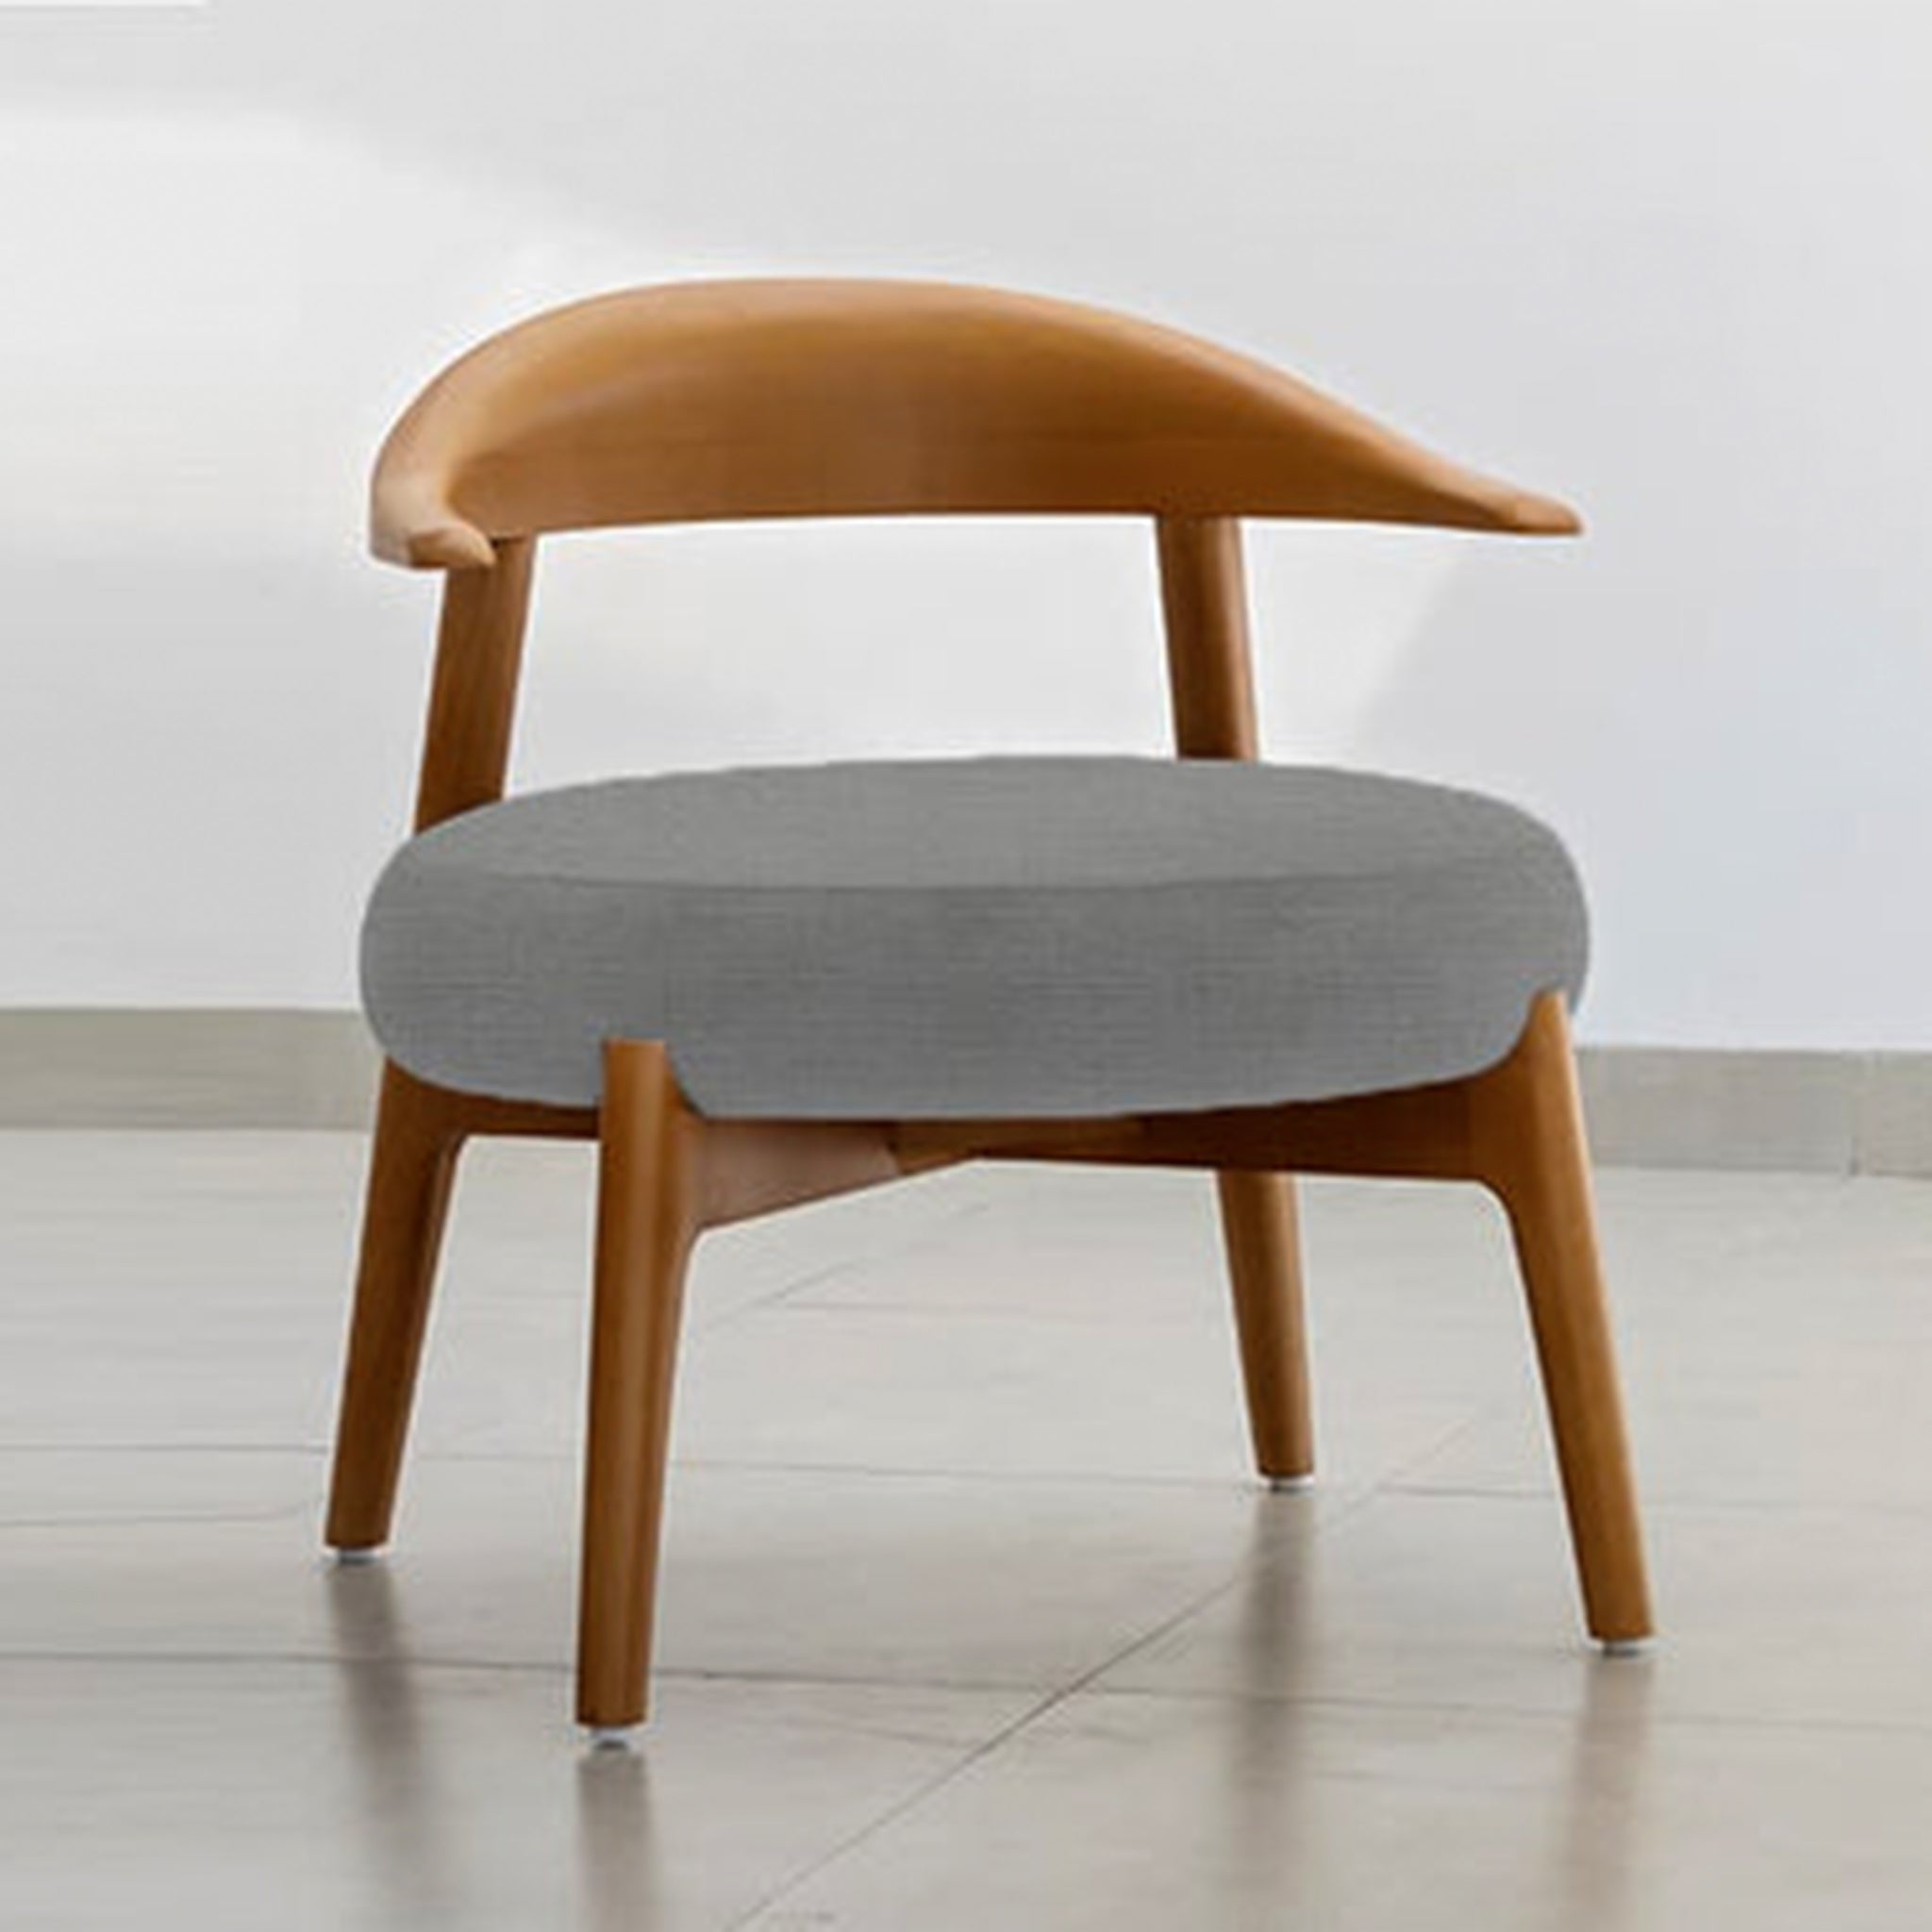 "The Hyde Accent Chair's curved wooden back and plush seating"